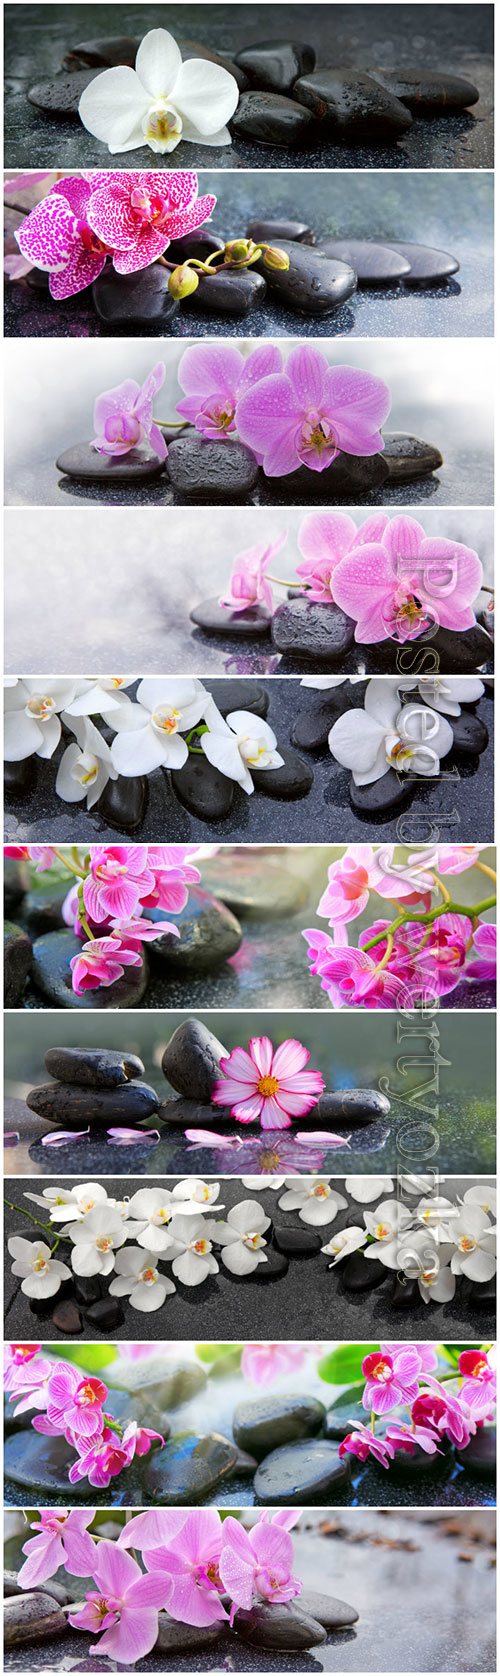 Orchids flowers and spa stones